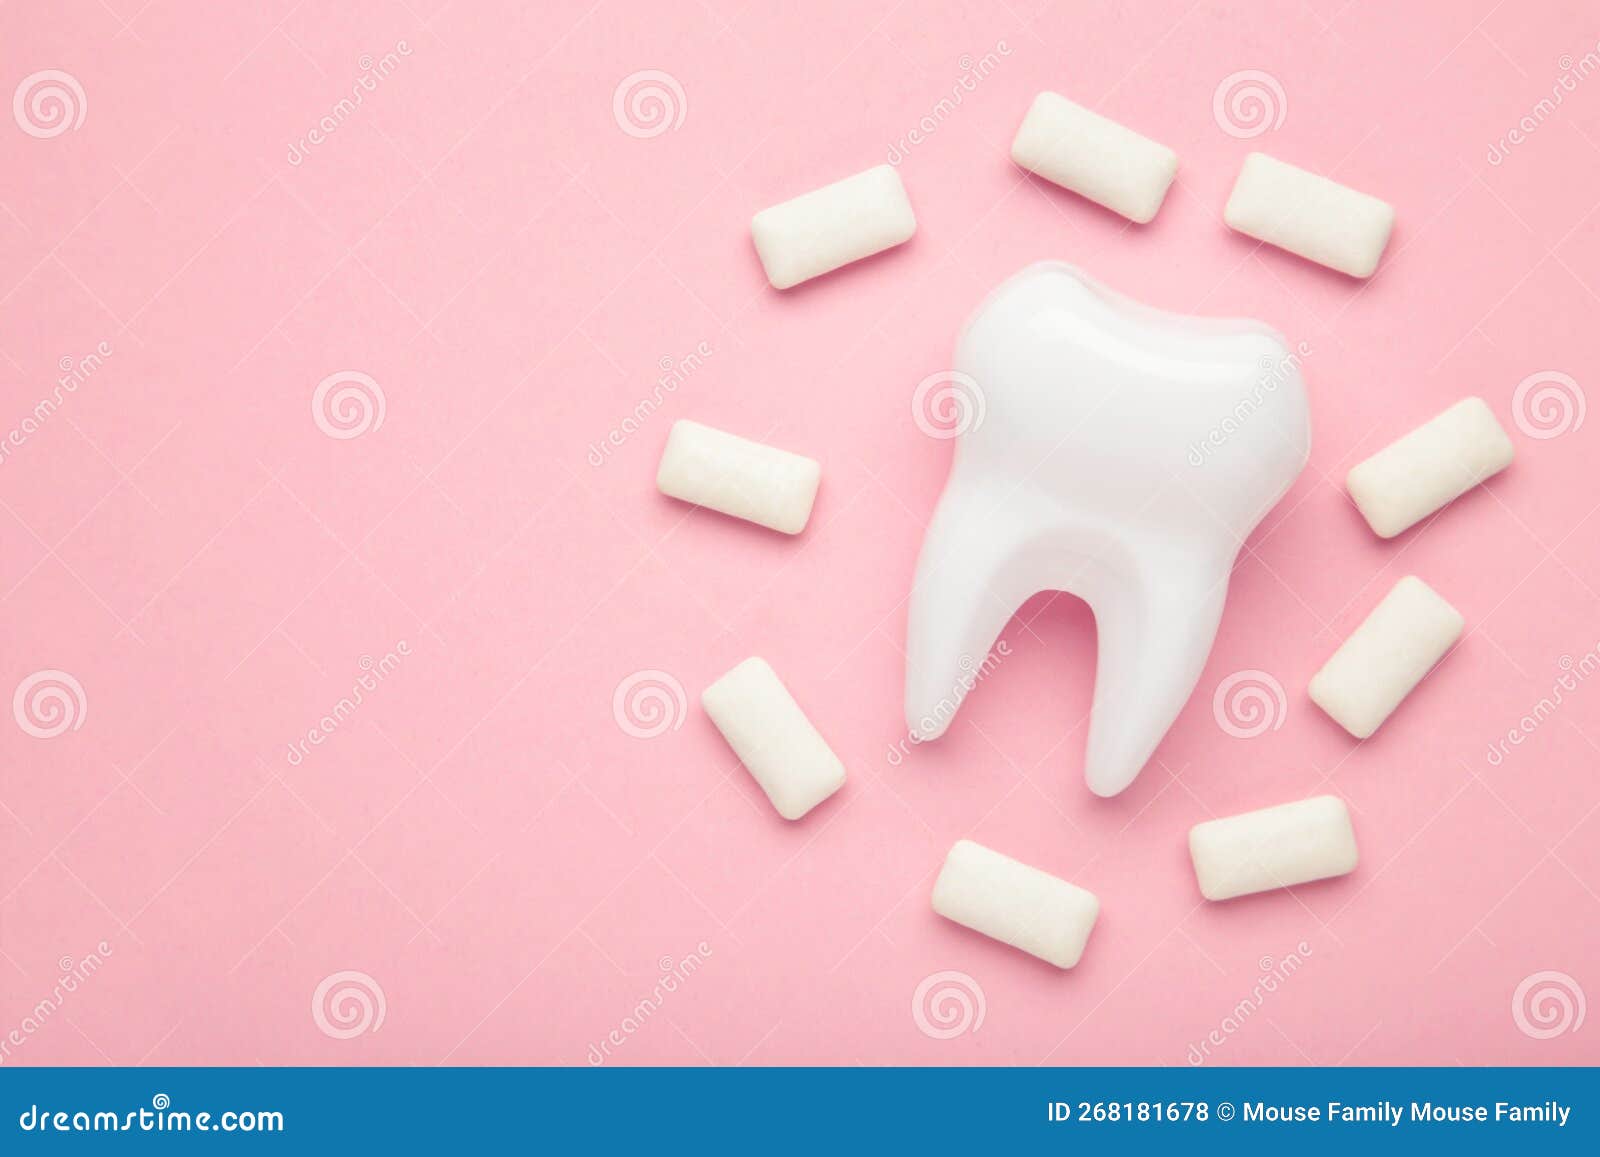 White Healthy Tooth Model And Heap Of Chewing Gums On Pink Background